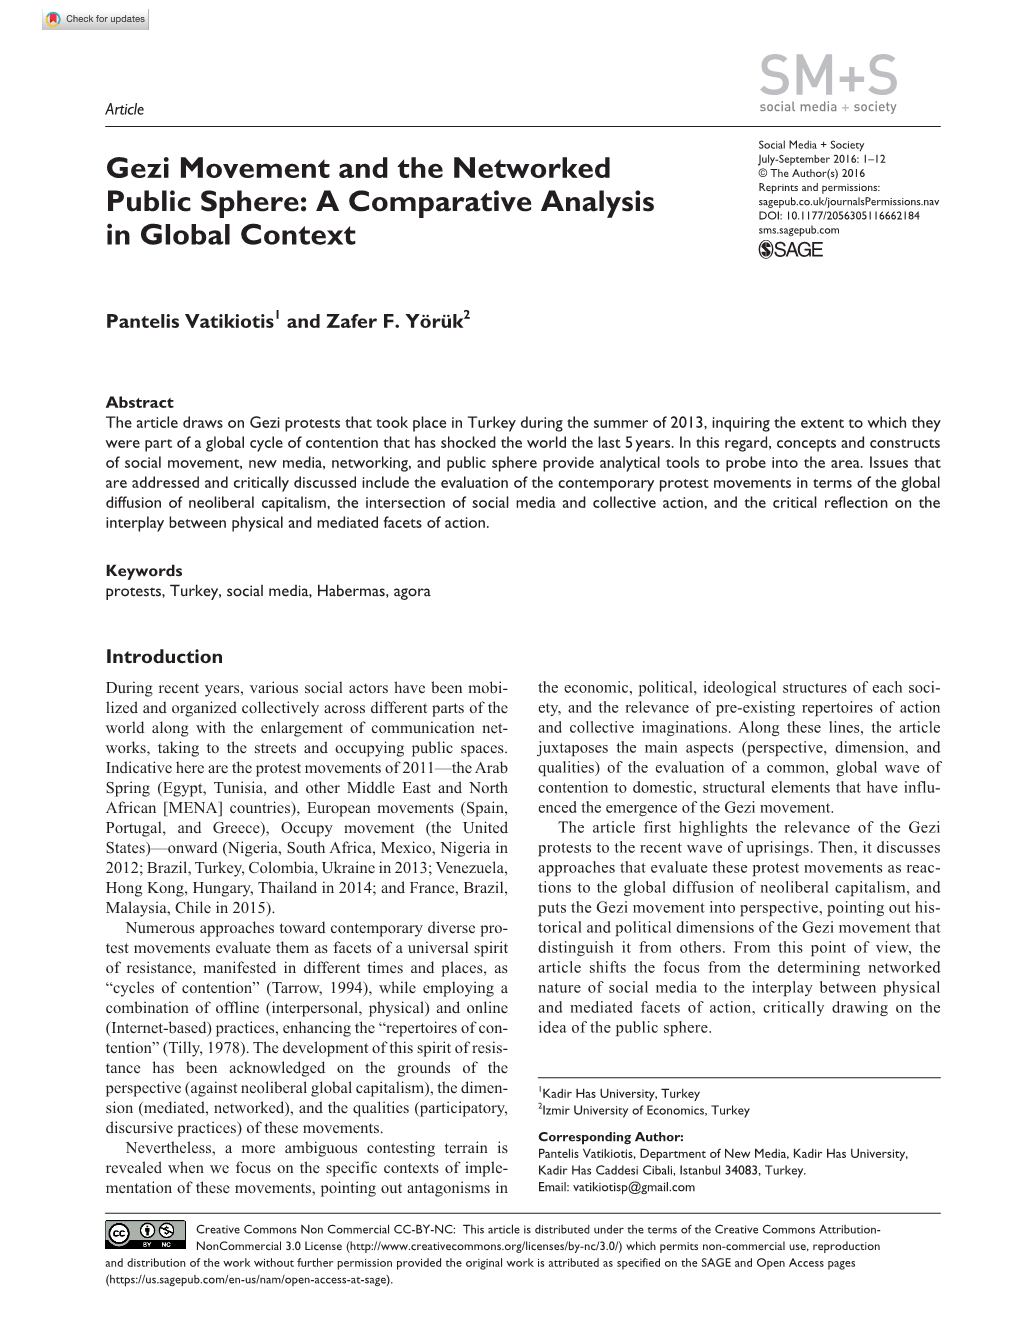 Gezi Movement and the Networked Public Sphere: a Comparative